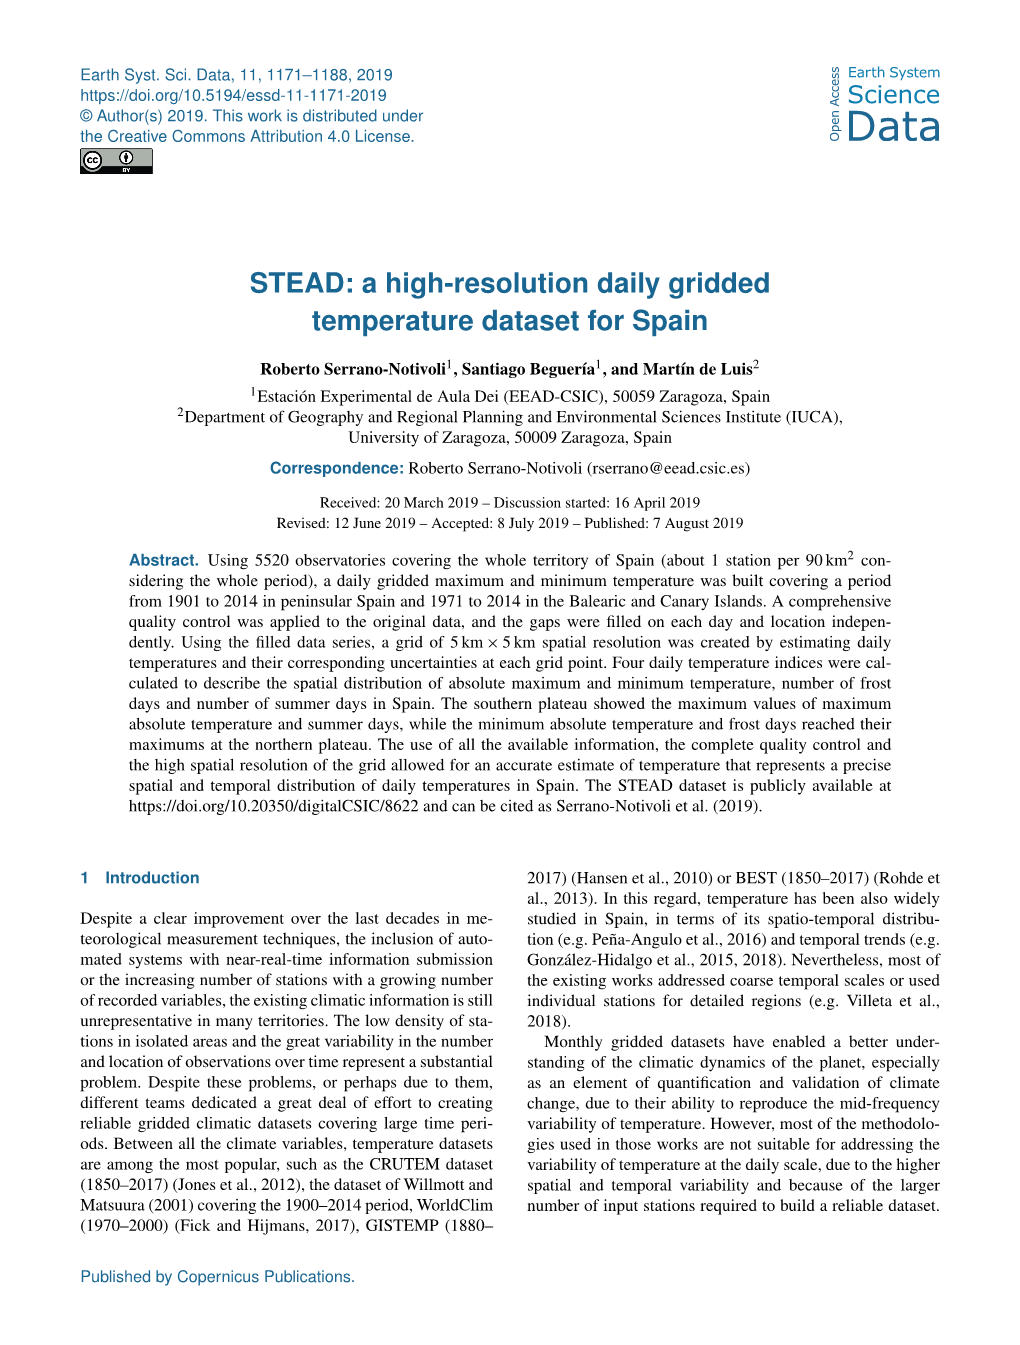 STEAD: a High-Resolution Daily Gridded Temperature Dataset for Spain